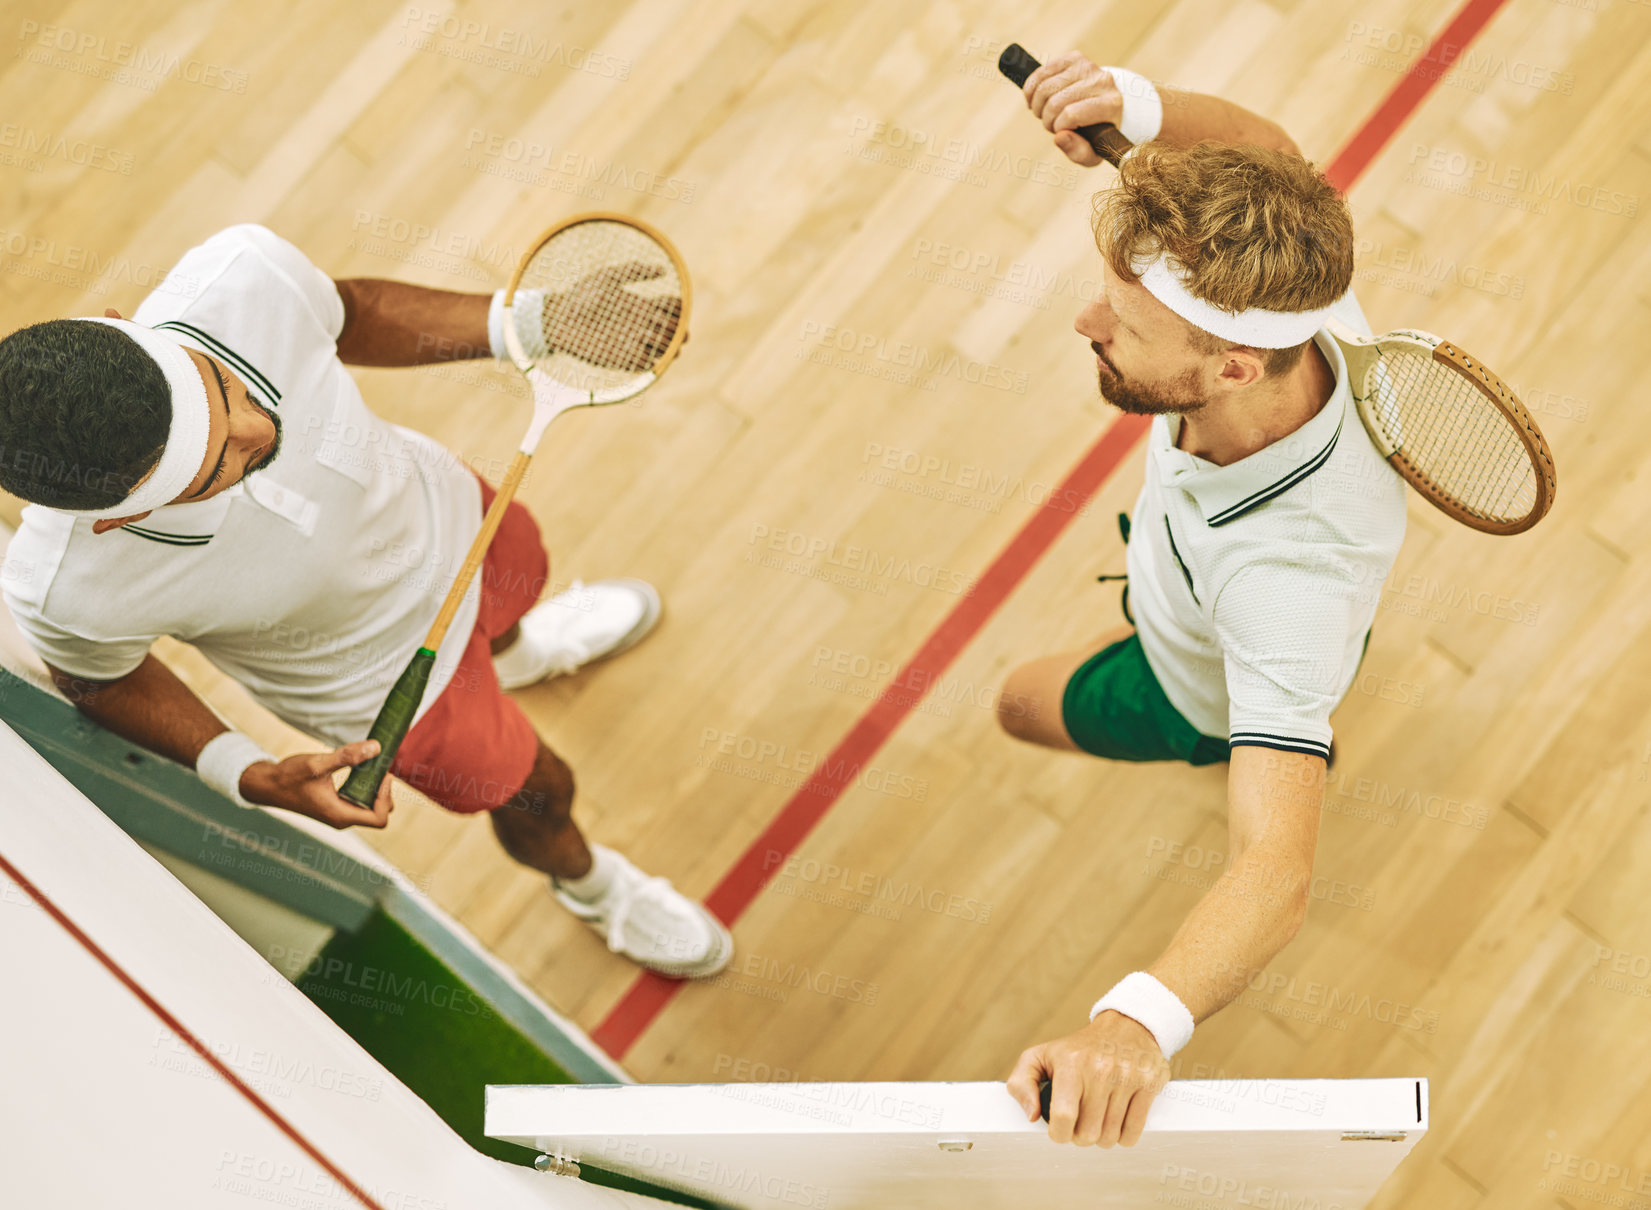 Buy stock photo High angle shot of two young men at a squash court